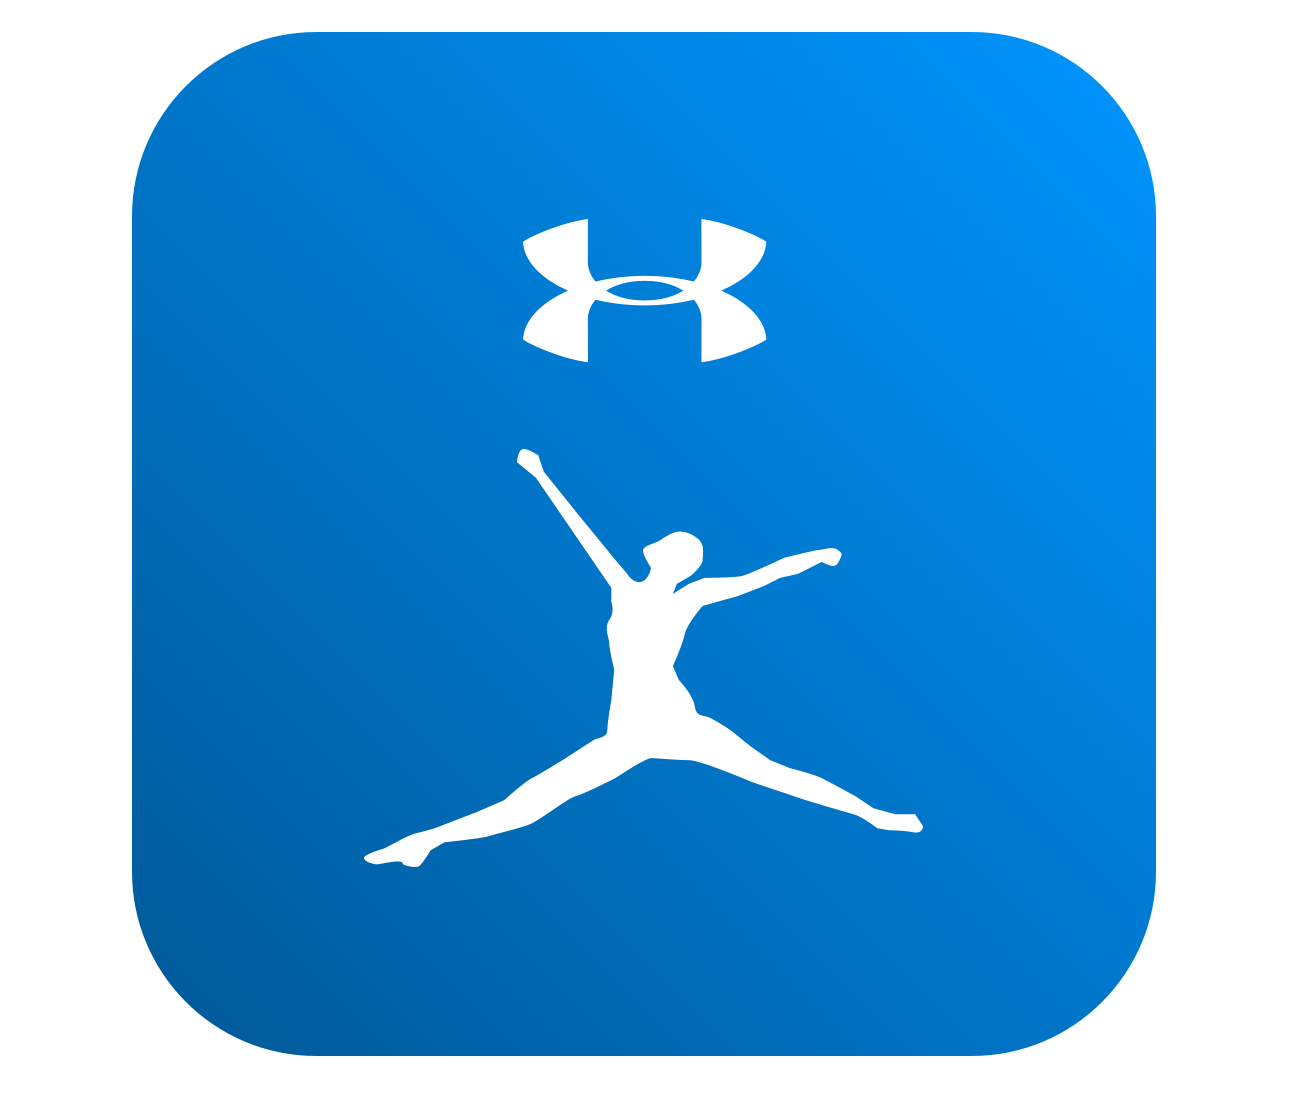 under armor my fitness pal